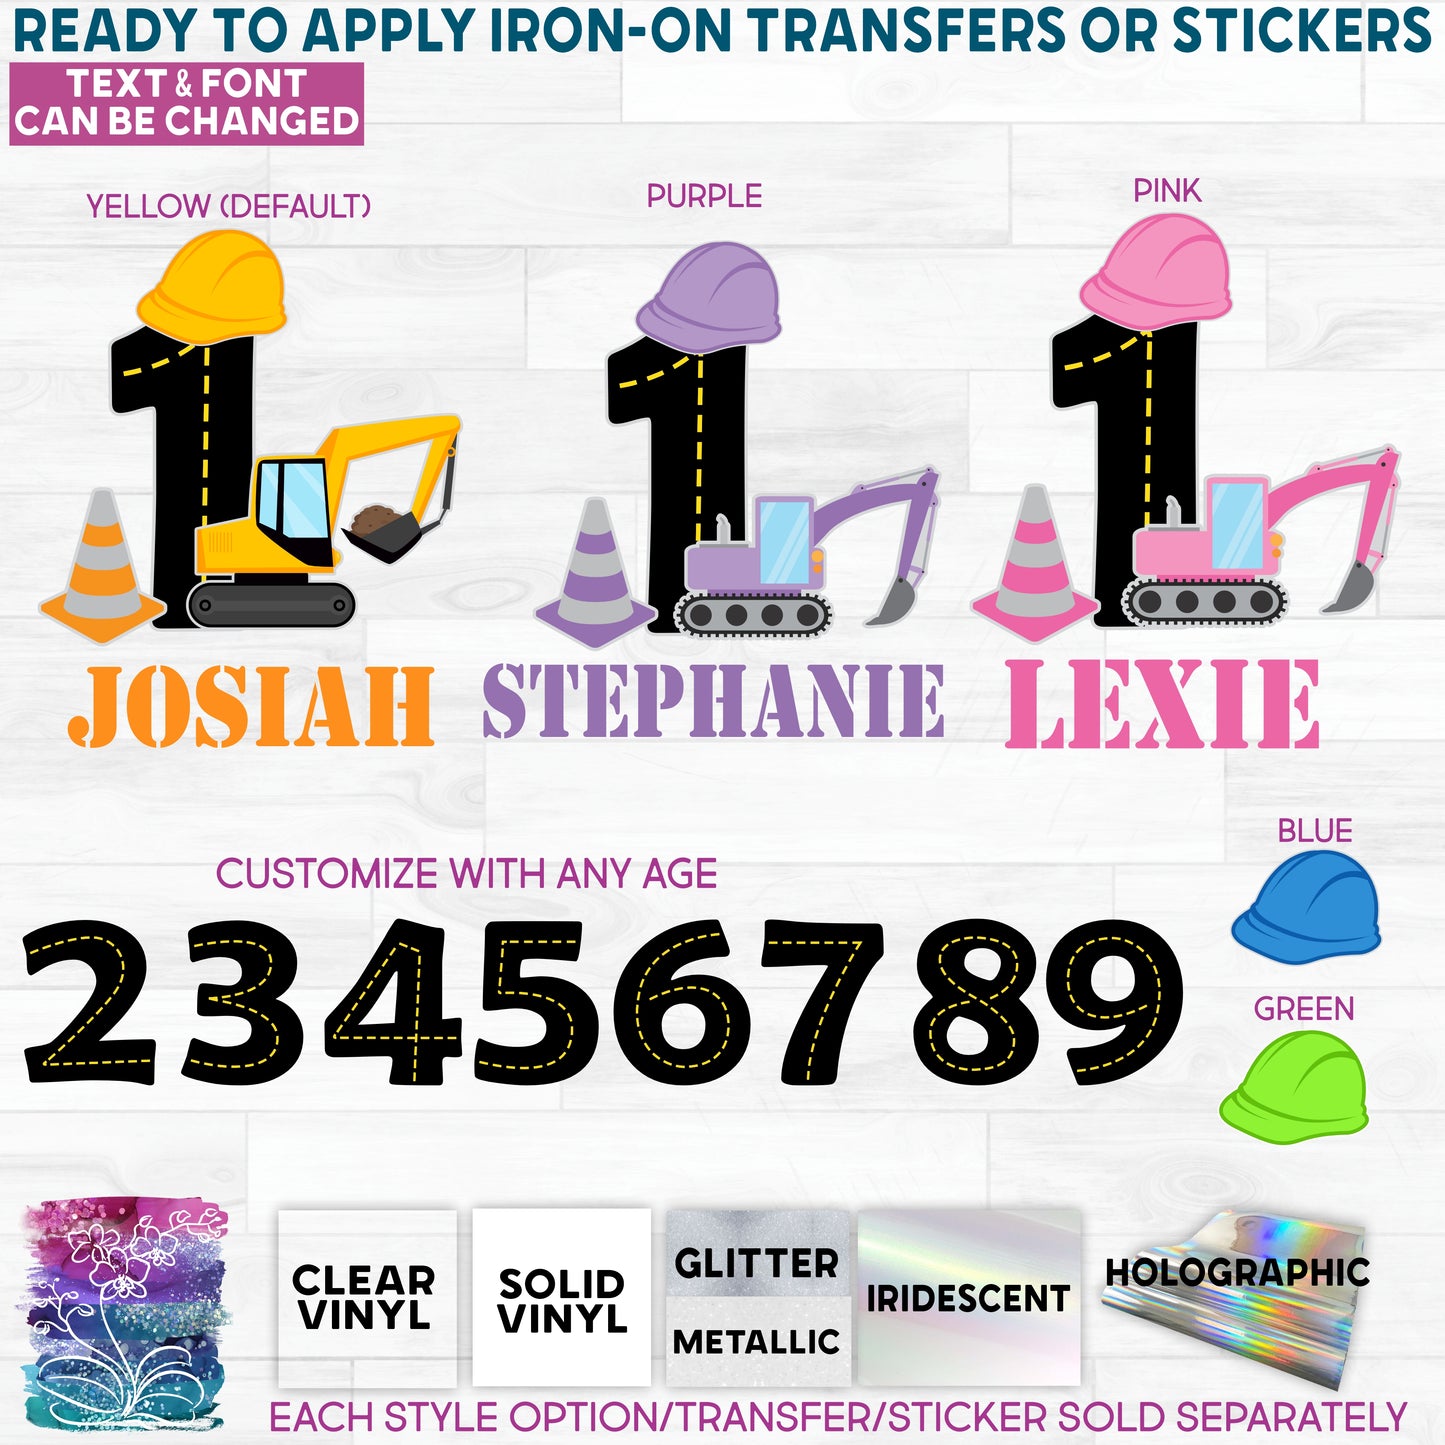 SBS-259-2C Construction Name Age 1 2 3 4 5 6 Custom Text Yellow Pink Purple Made-to-Order Iron-On Transfer or Sticker